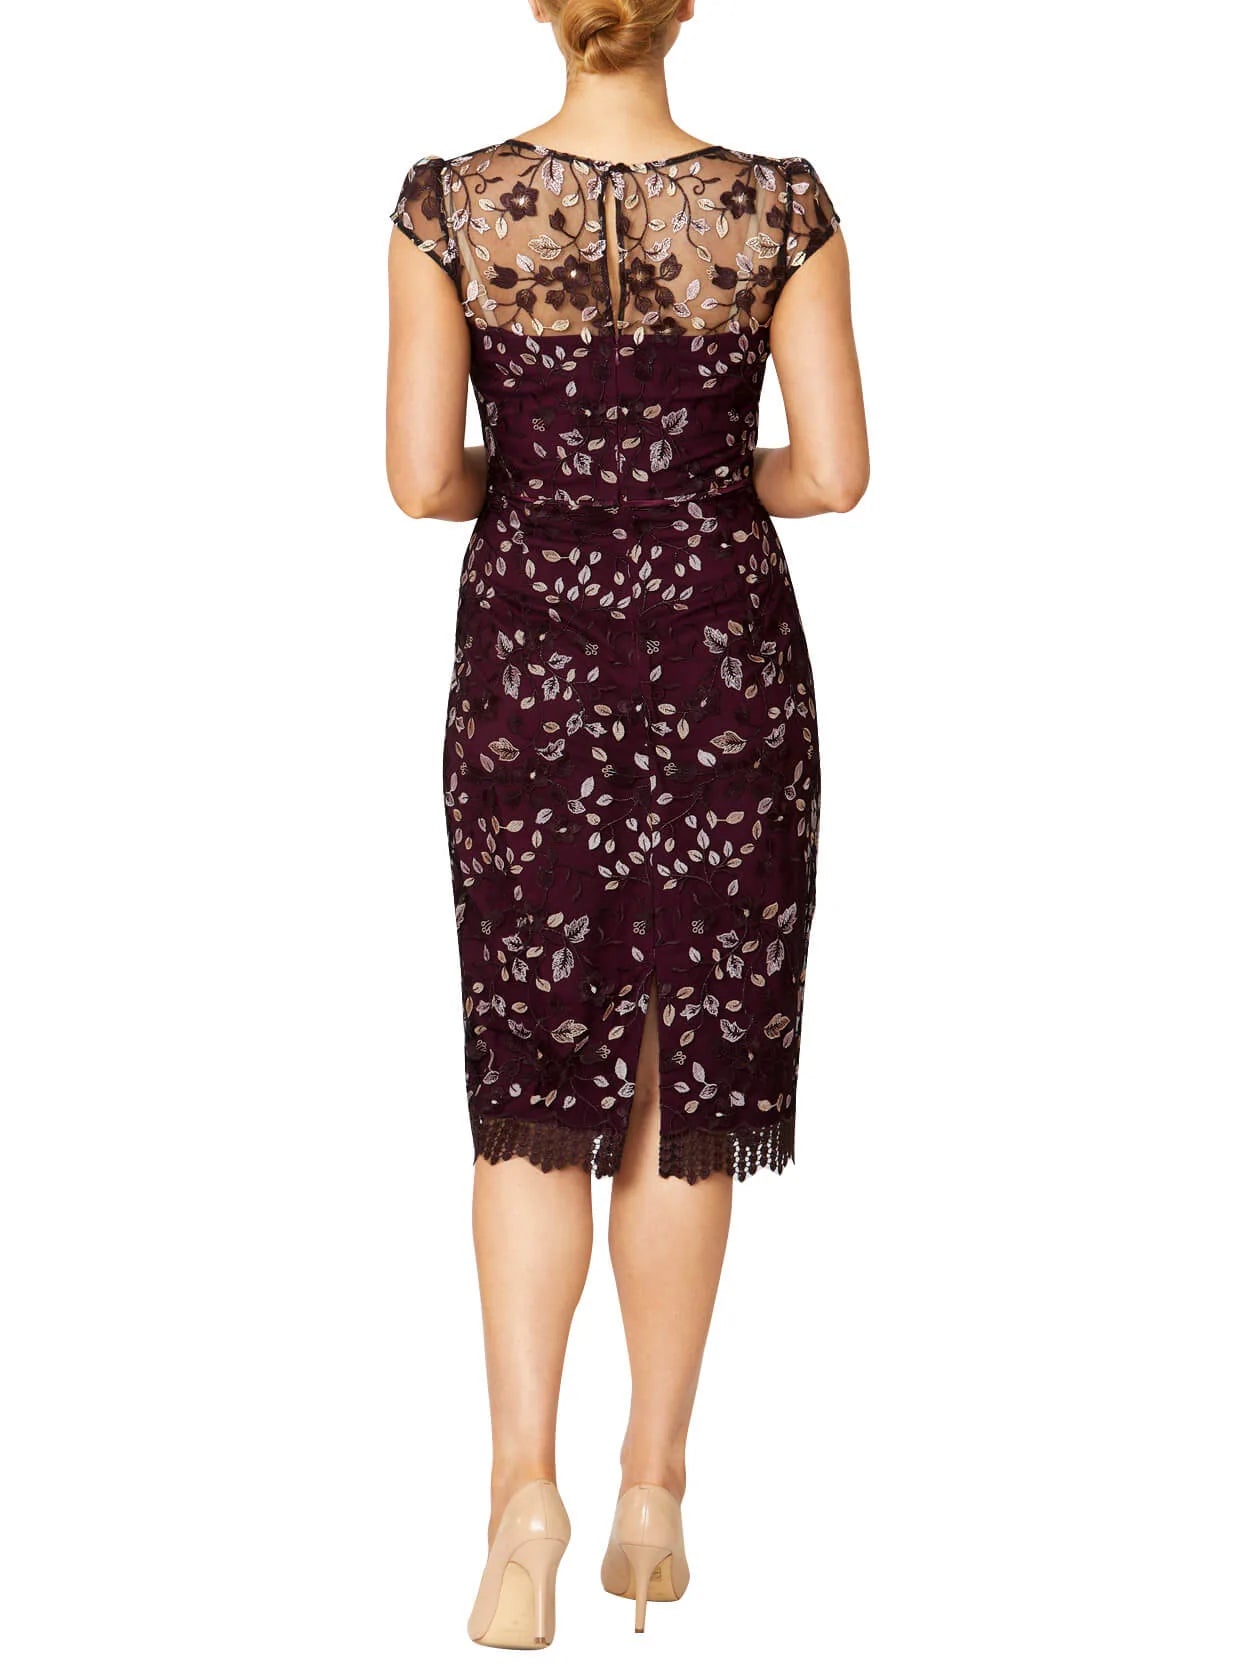 Floral Embroidered Mesh Dress SD16412 - After Hours Boutique